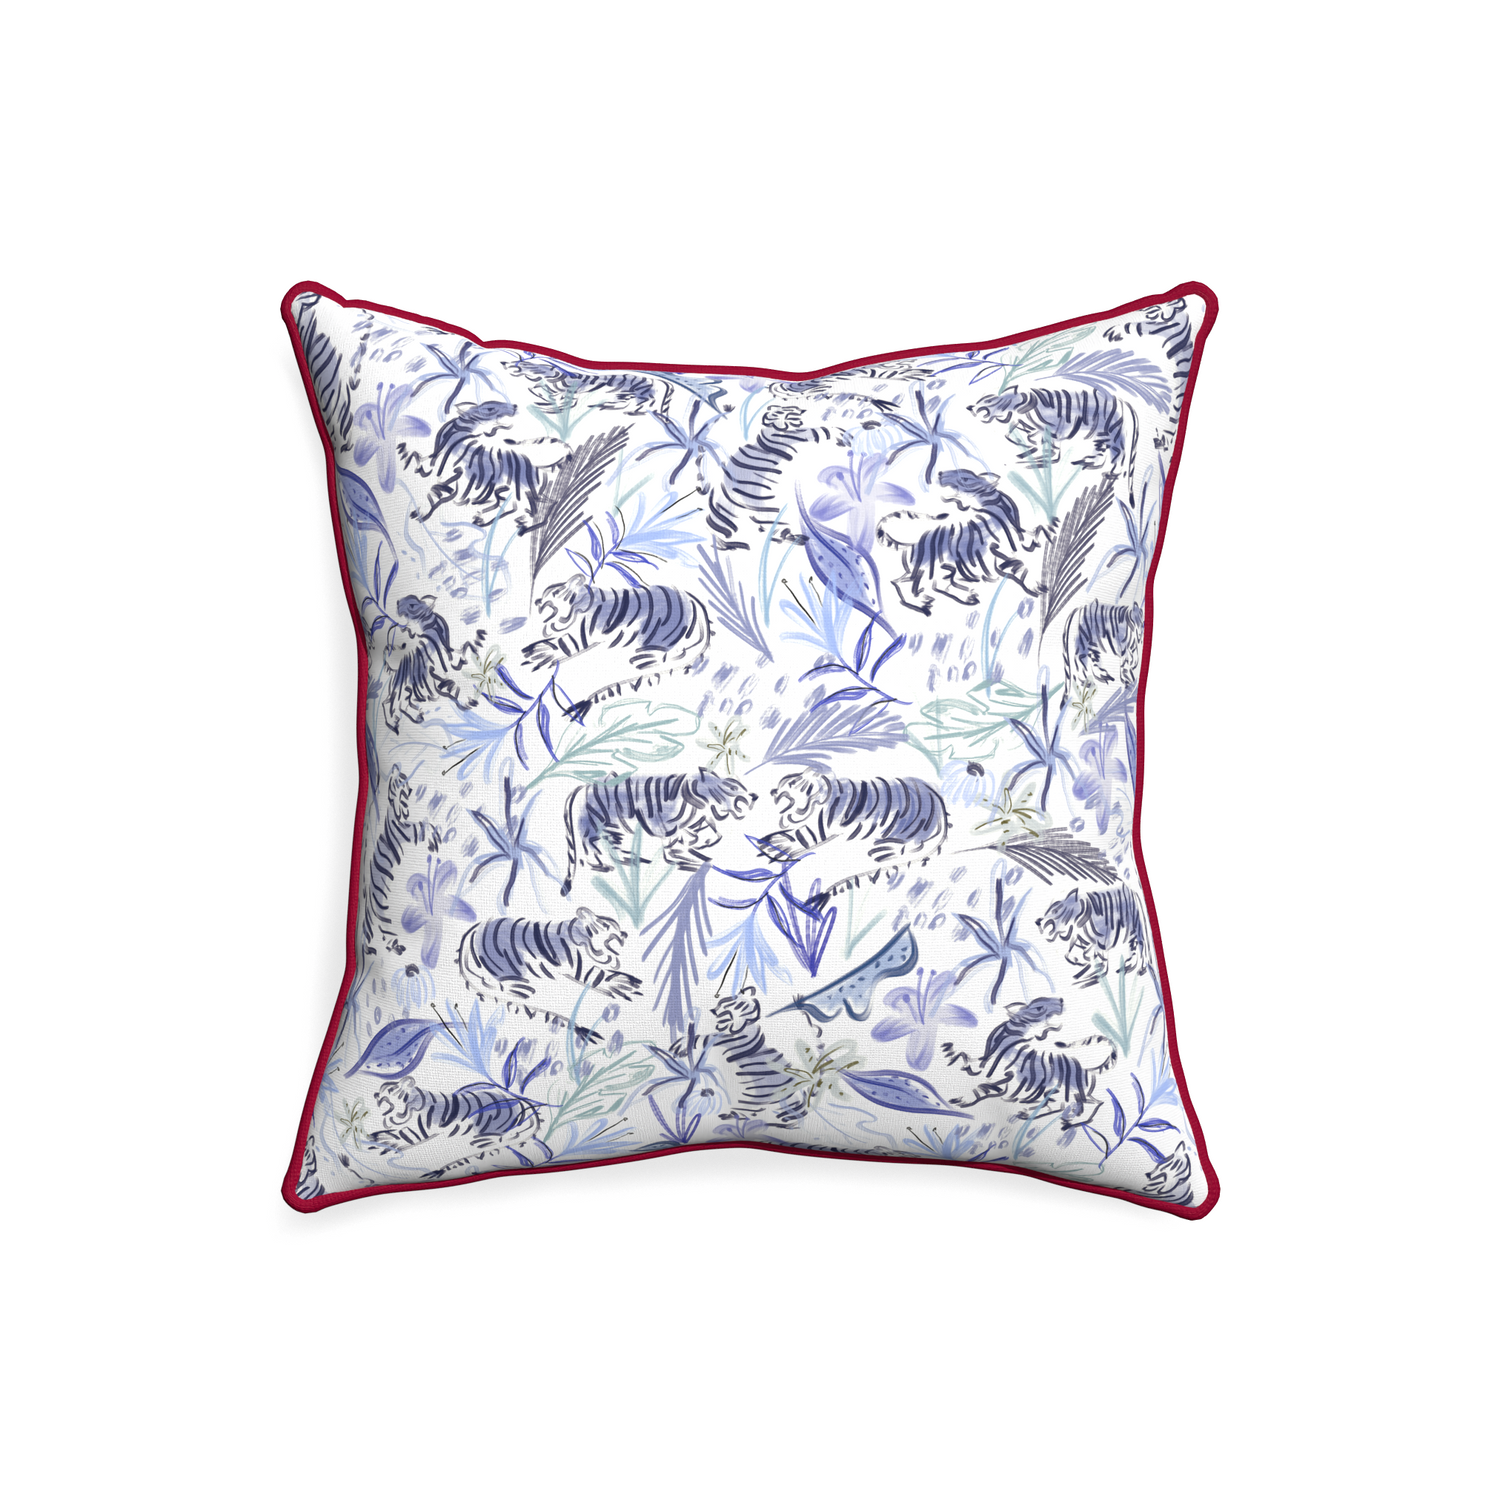 20-square frida blue custom blue with intricate tiger designpillow with raspberry piping on white background